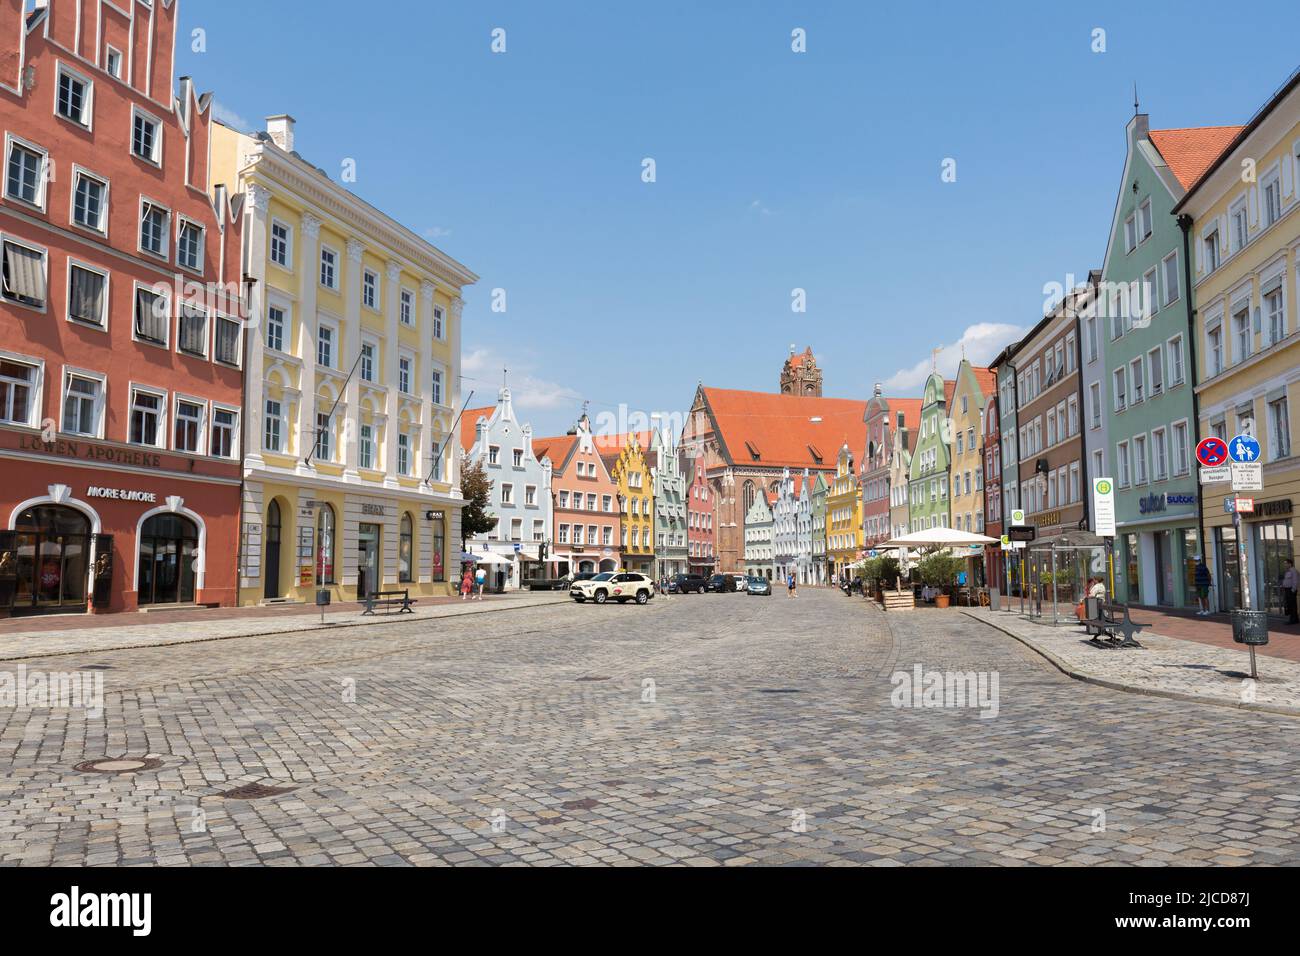 Landshut, Germany - Aug 15, 2021: View along the 'Altstadt' (old town) of Landshut. With historical houses. Stock Photo